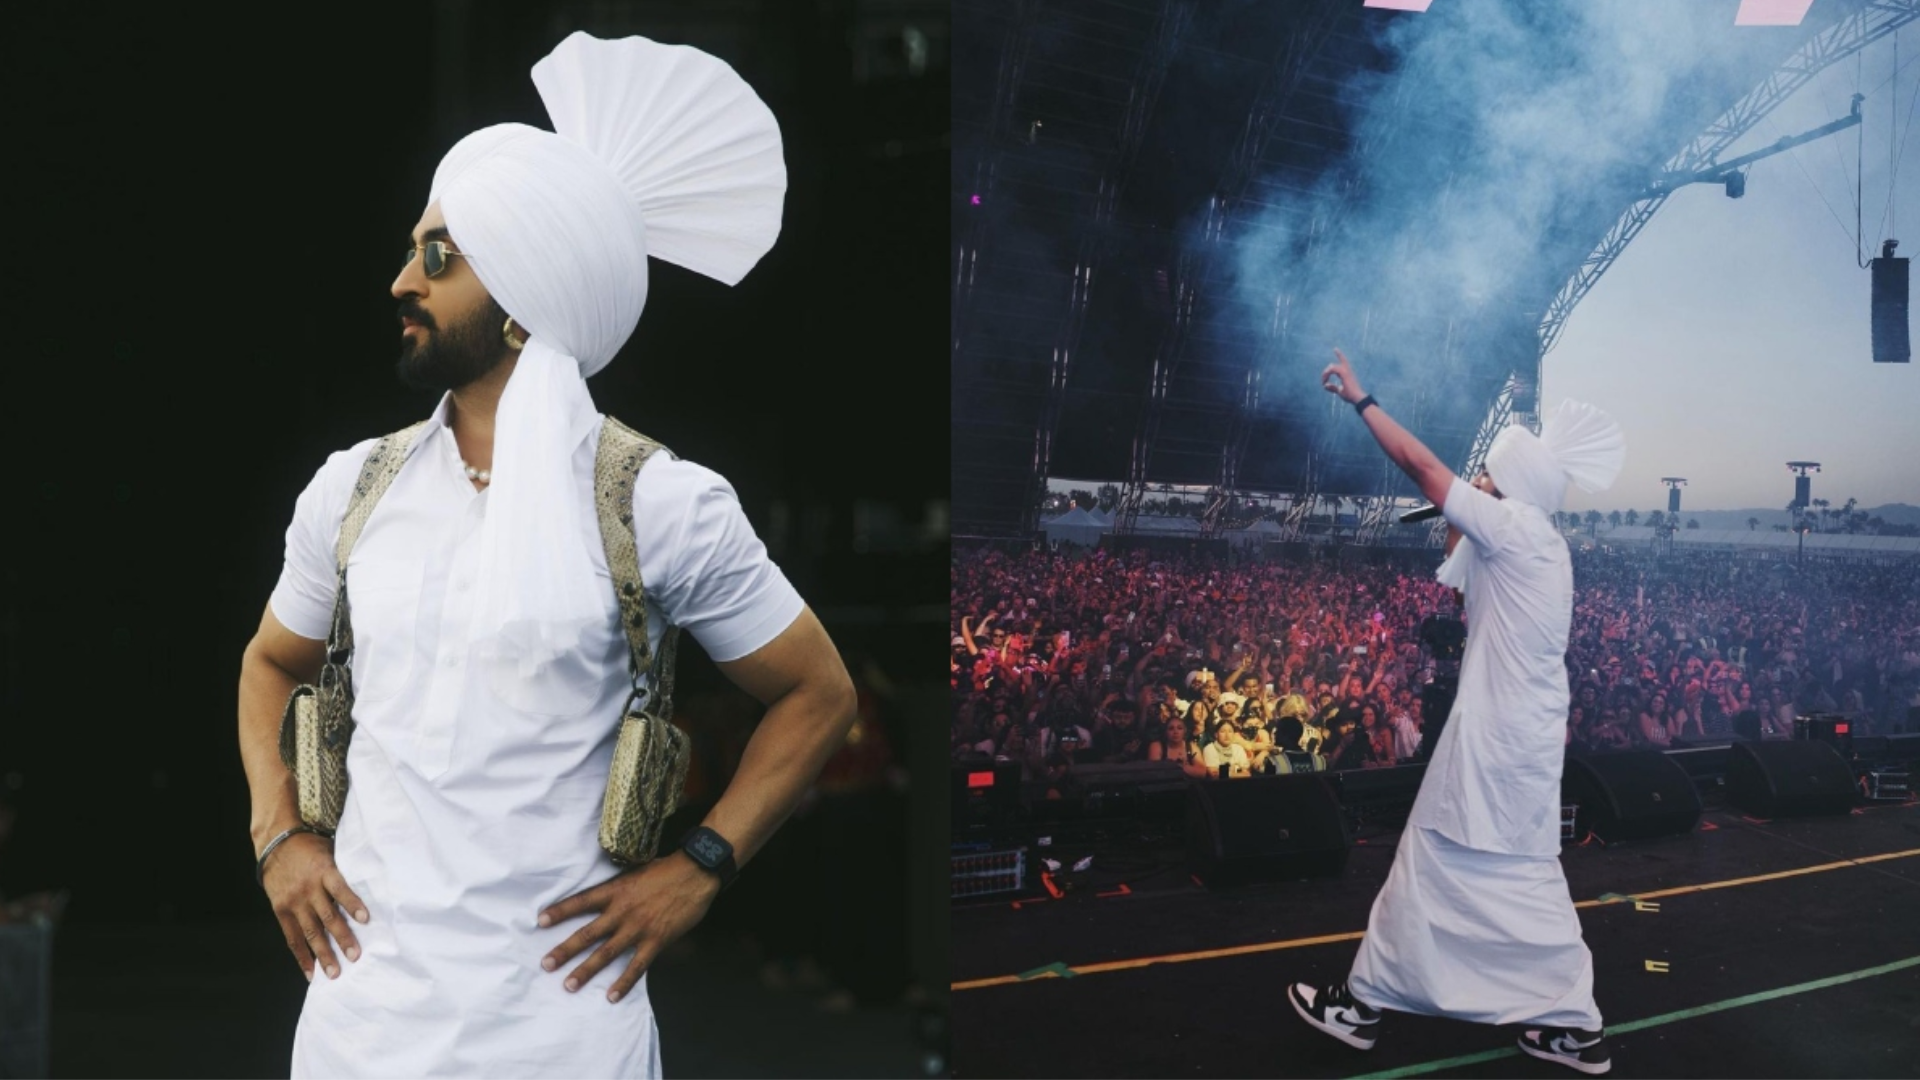 Diljit Dosanjh Set To Charm America: A Night With Punjabi Swagger On The Tonight Show Starring Jimmy Fallon!